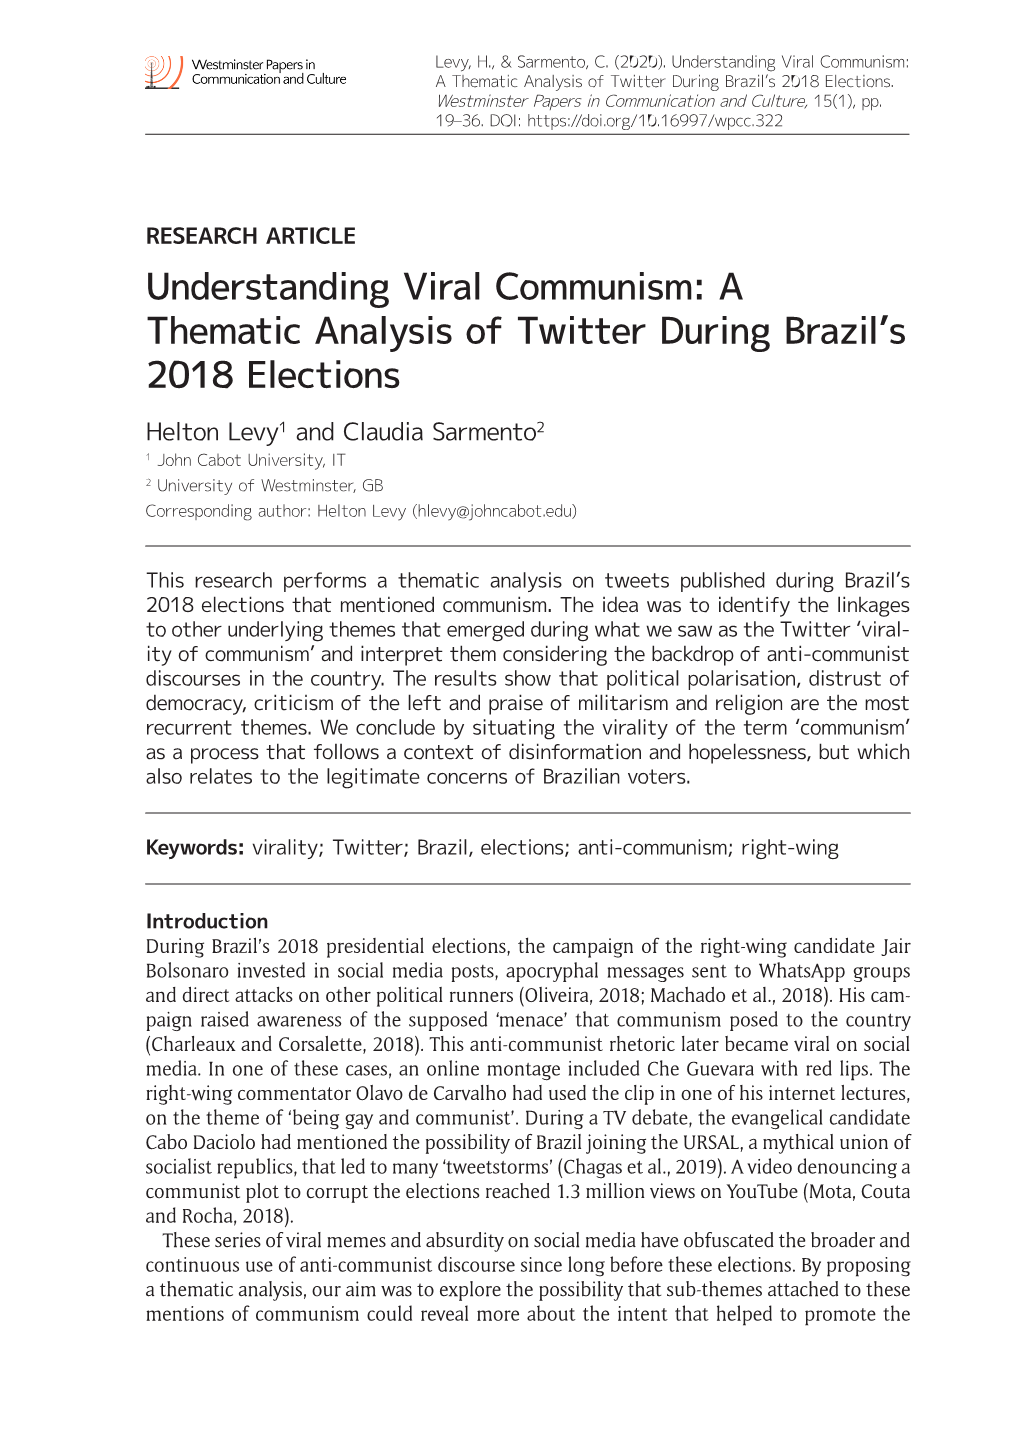 Understanding Viral Communism: a Thematic Analysis of Twitter During Brazil’S 2018 Elections